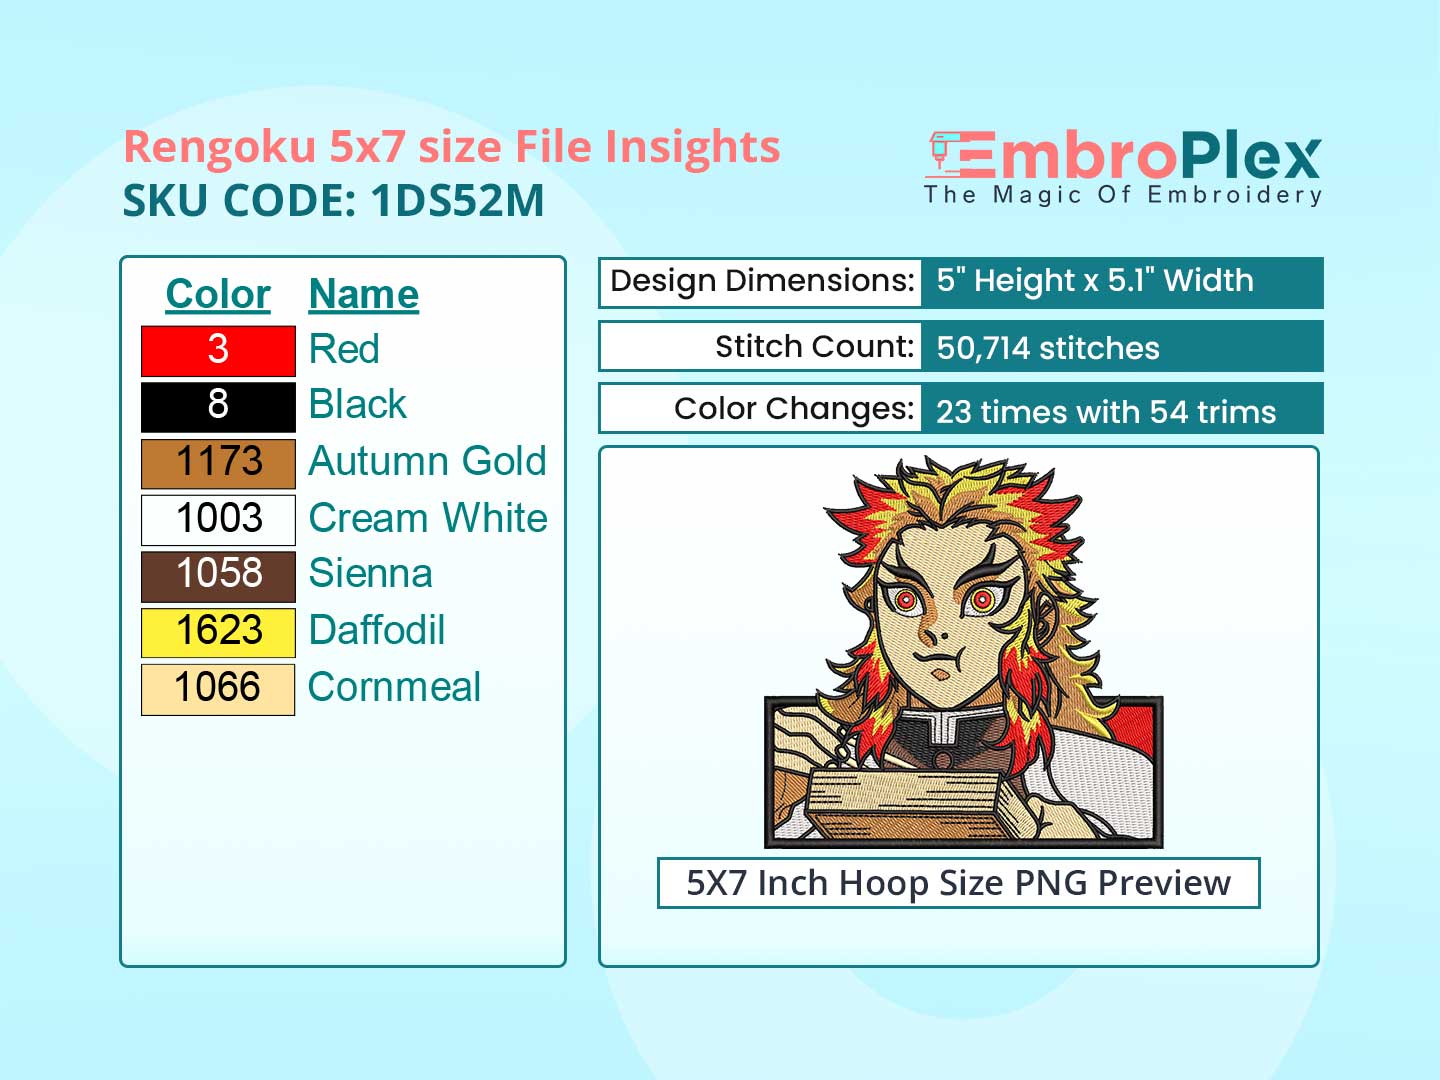 Anime-Inspired Rengoku Embroidery Design File - 5x7 Inch hoop Size Variation overview image\